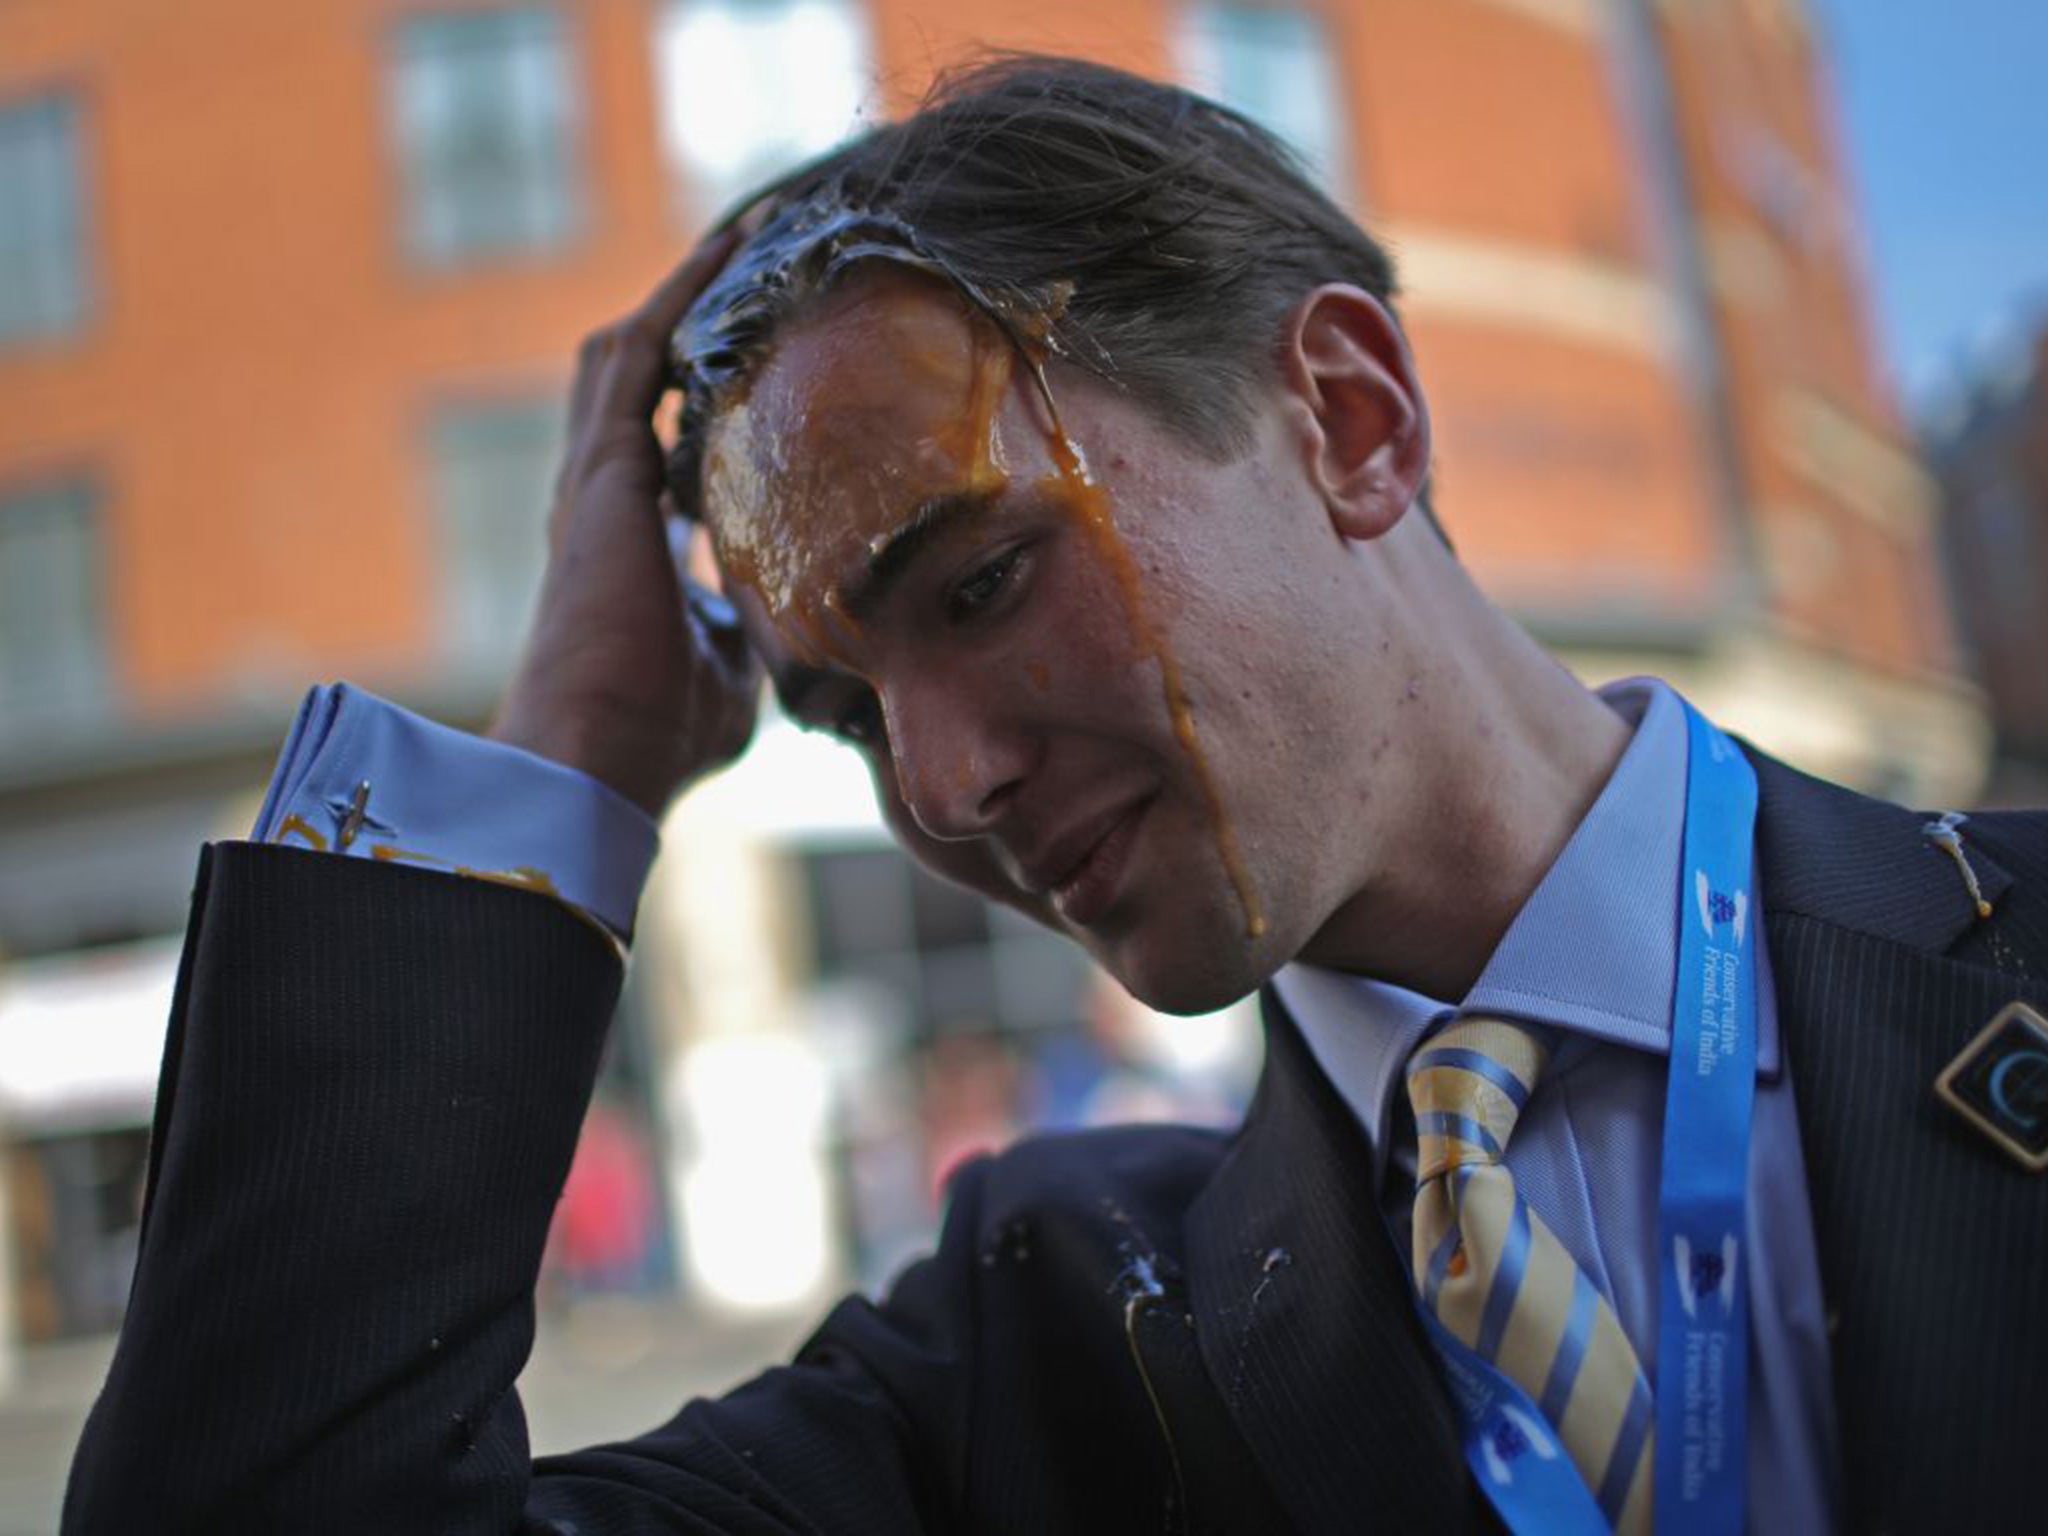 A young Tory delegate is hit by an egg as he arrives for the first day of the Conservative Party Autumn Conference 2015 on October 4, 2015